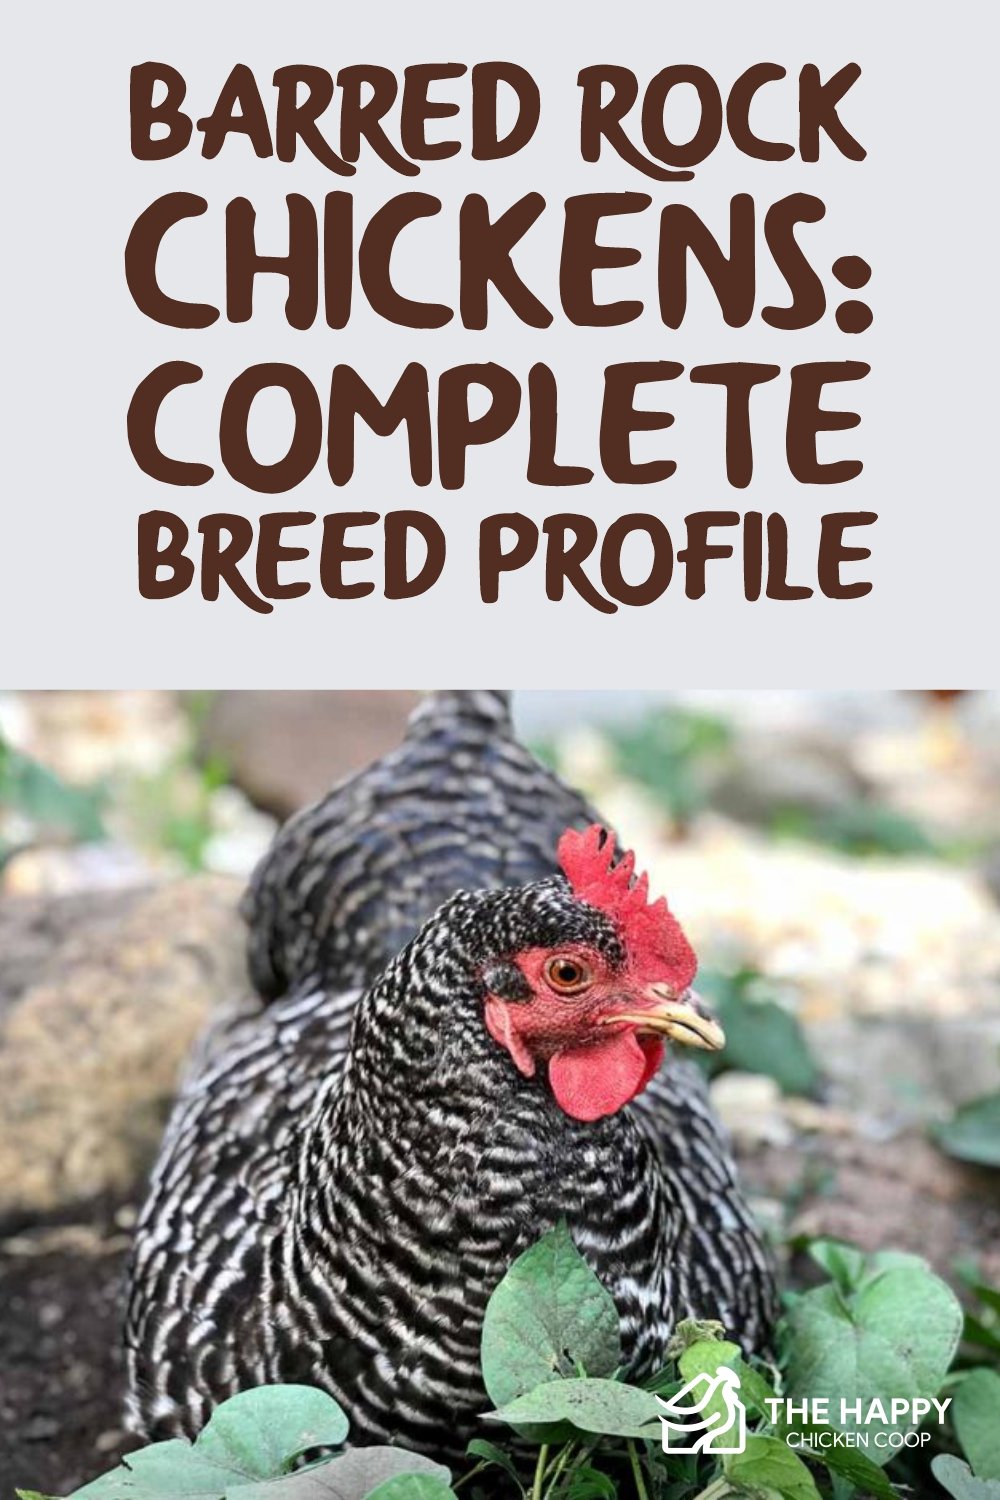 Barred Rock Chickens- Complete Breed Profile